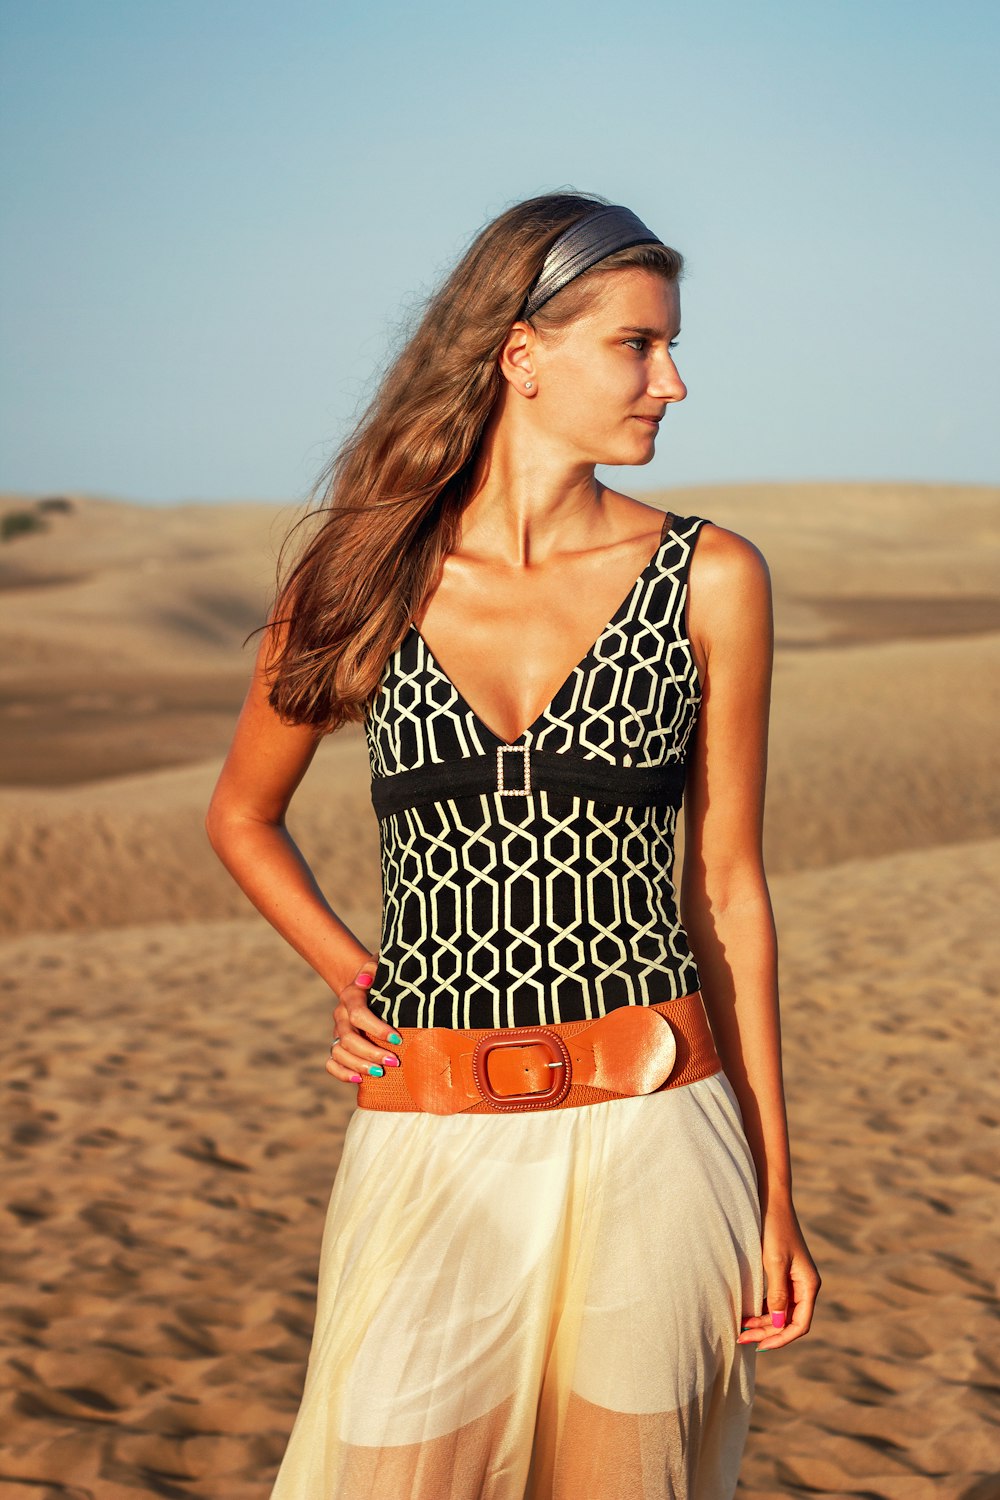 woman in black and white polka dot halter top dress standing on brown sand during daytime